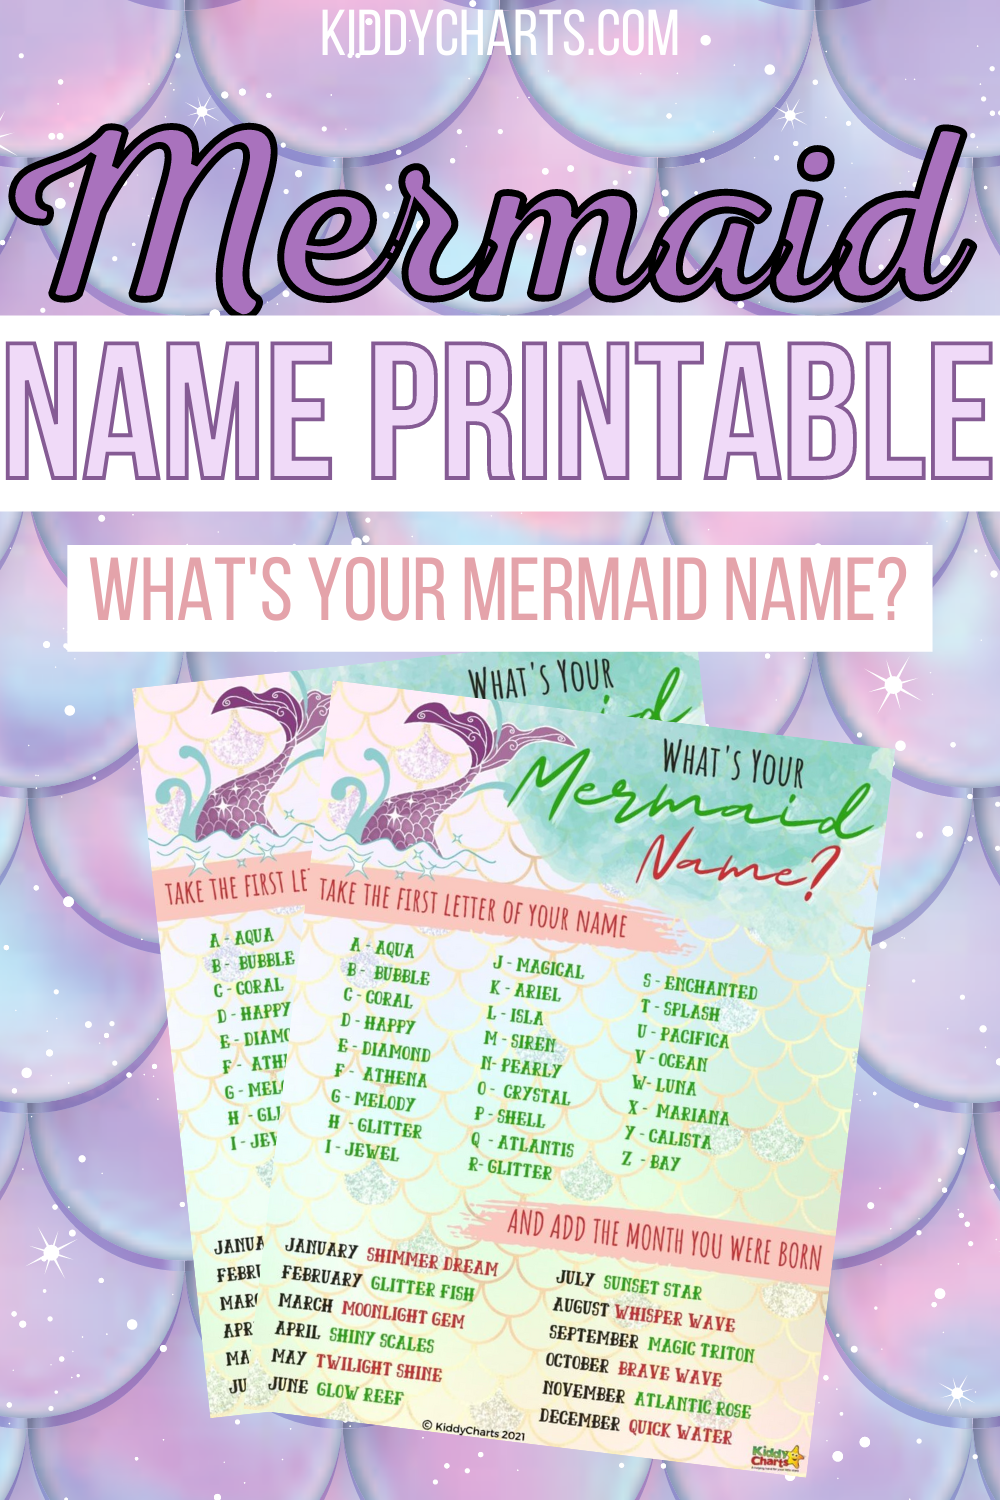 what-s-your-mermaid-name-a-to-z-kiddycharts